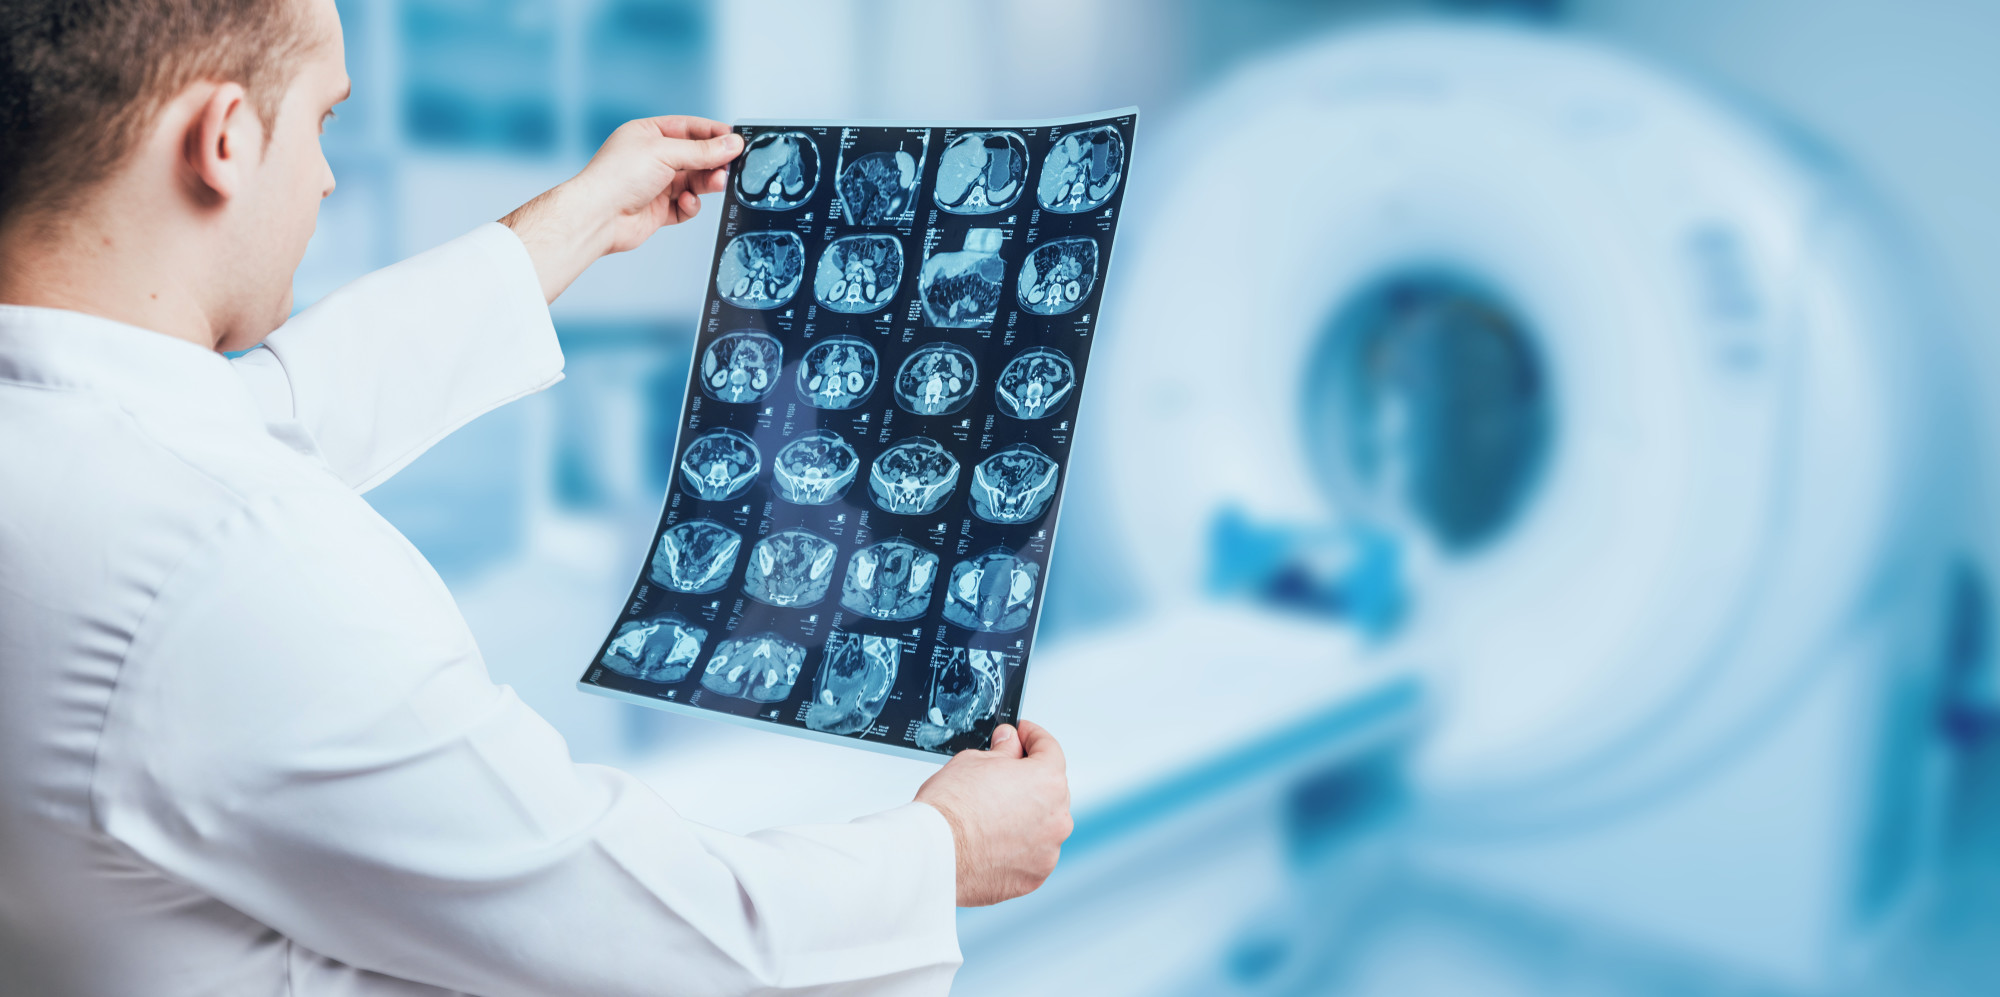 How Long Does It Take To Become A Radiologist Technician - Careerbrightcom